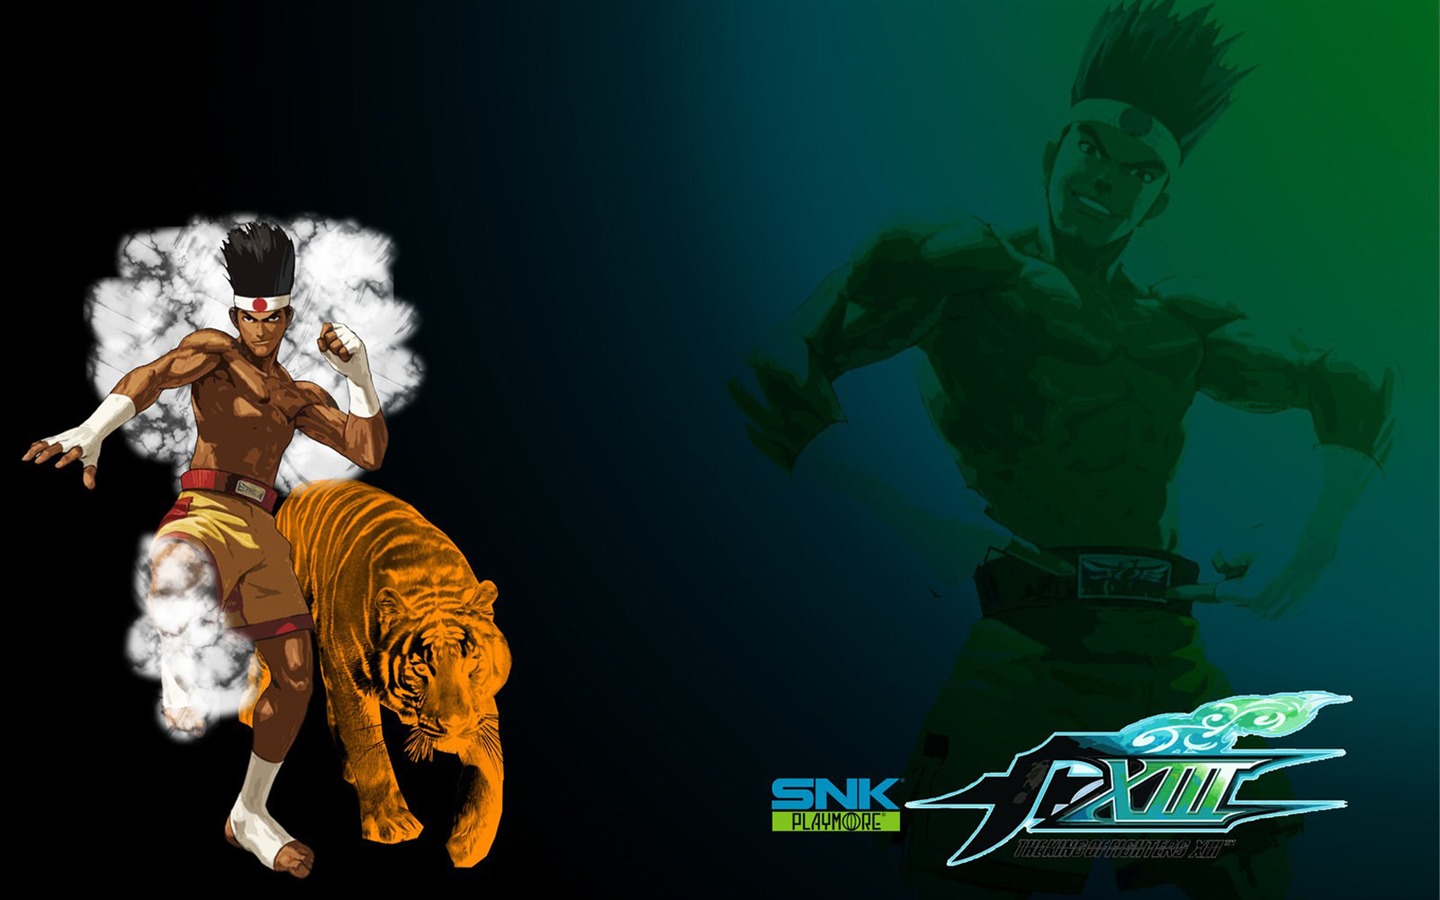 The King of Fighters XIII wallpapers #13 - 1440x900